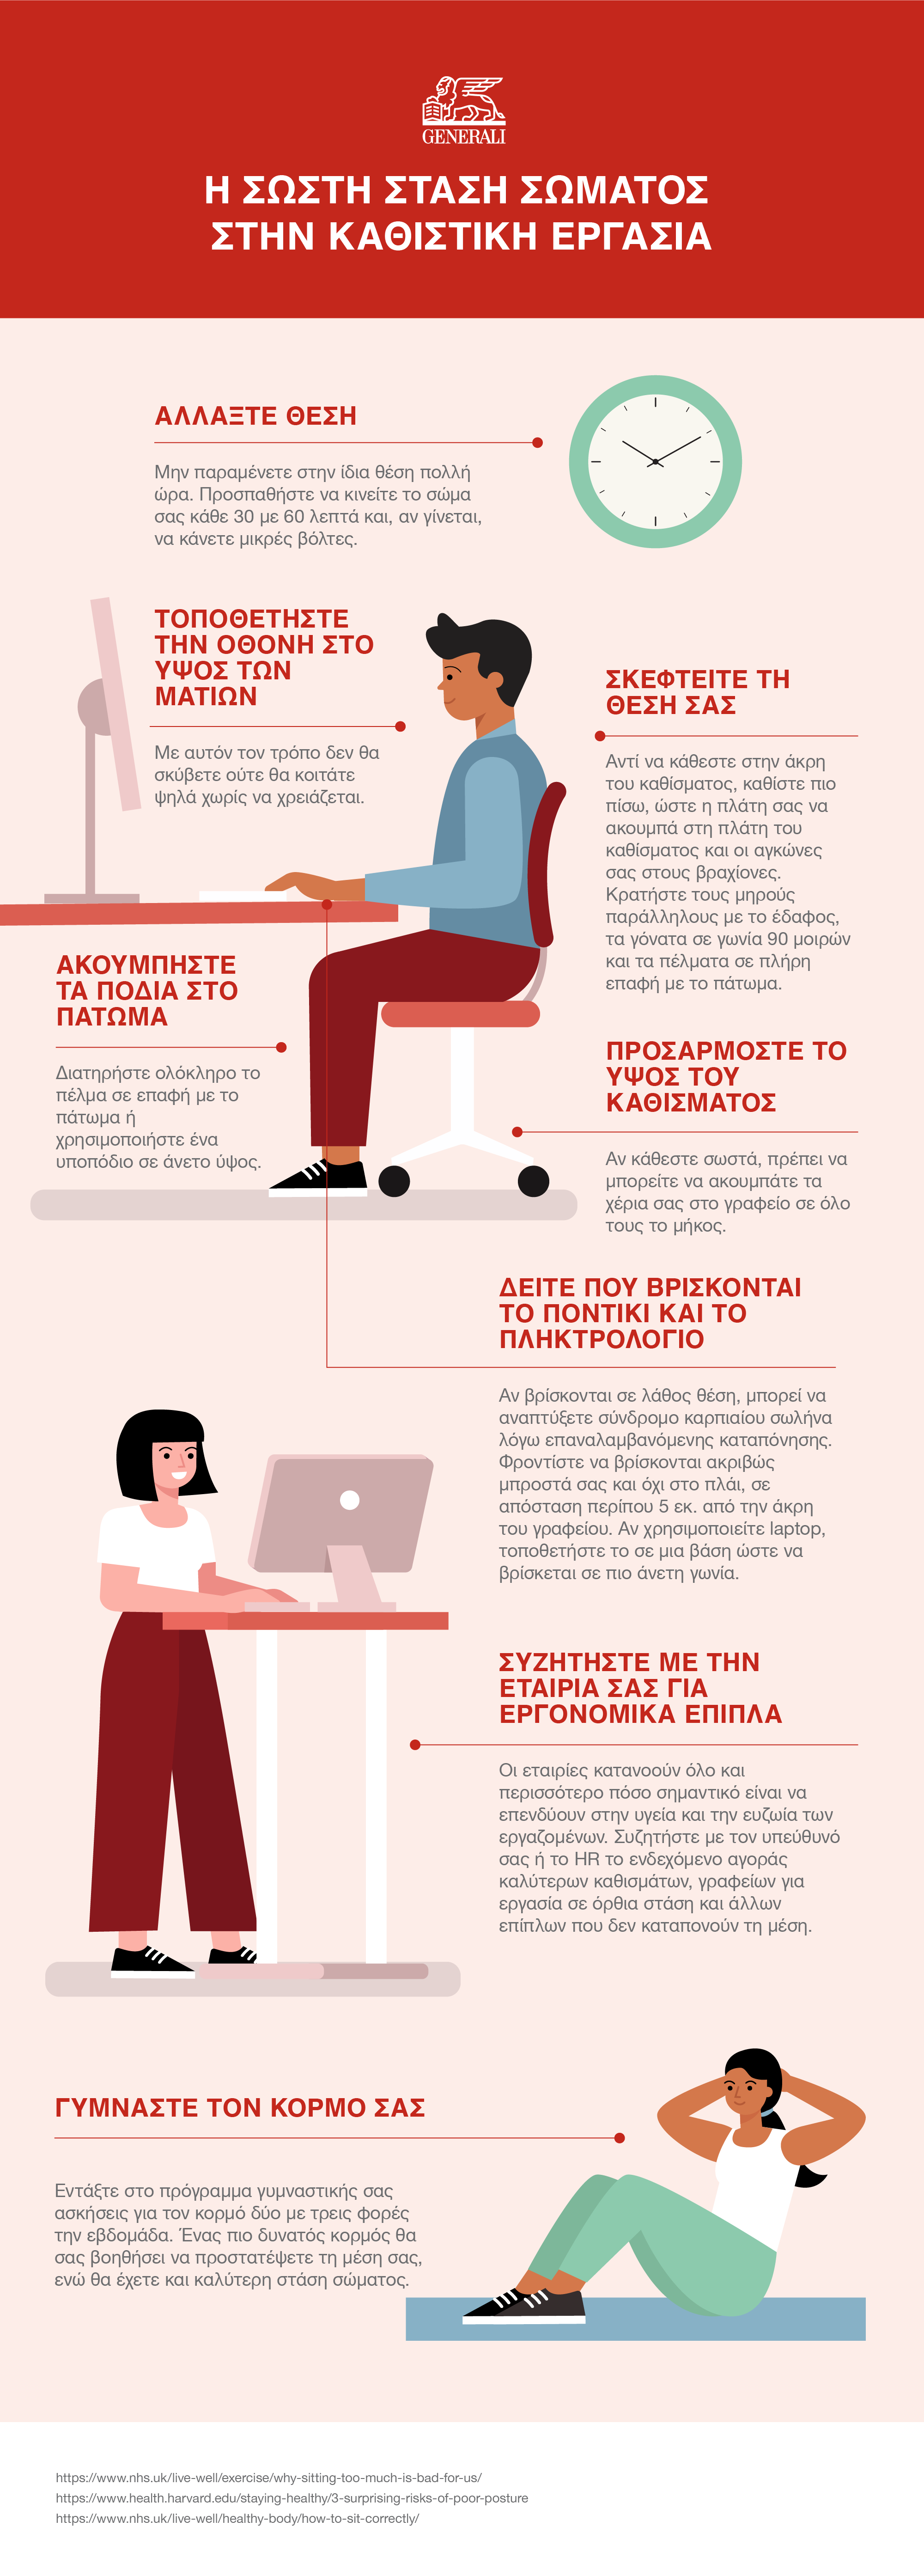 Generali Greece_How to Sit at Your Desk Without Damaging Your Back Infographic_4.5.21.png